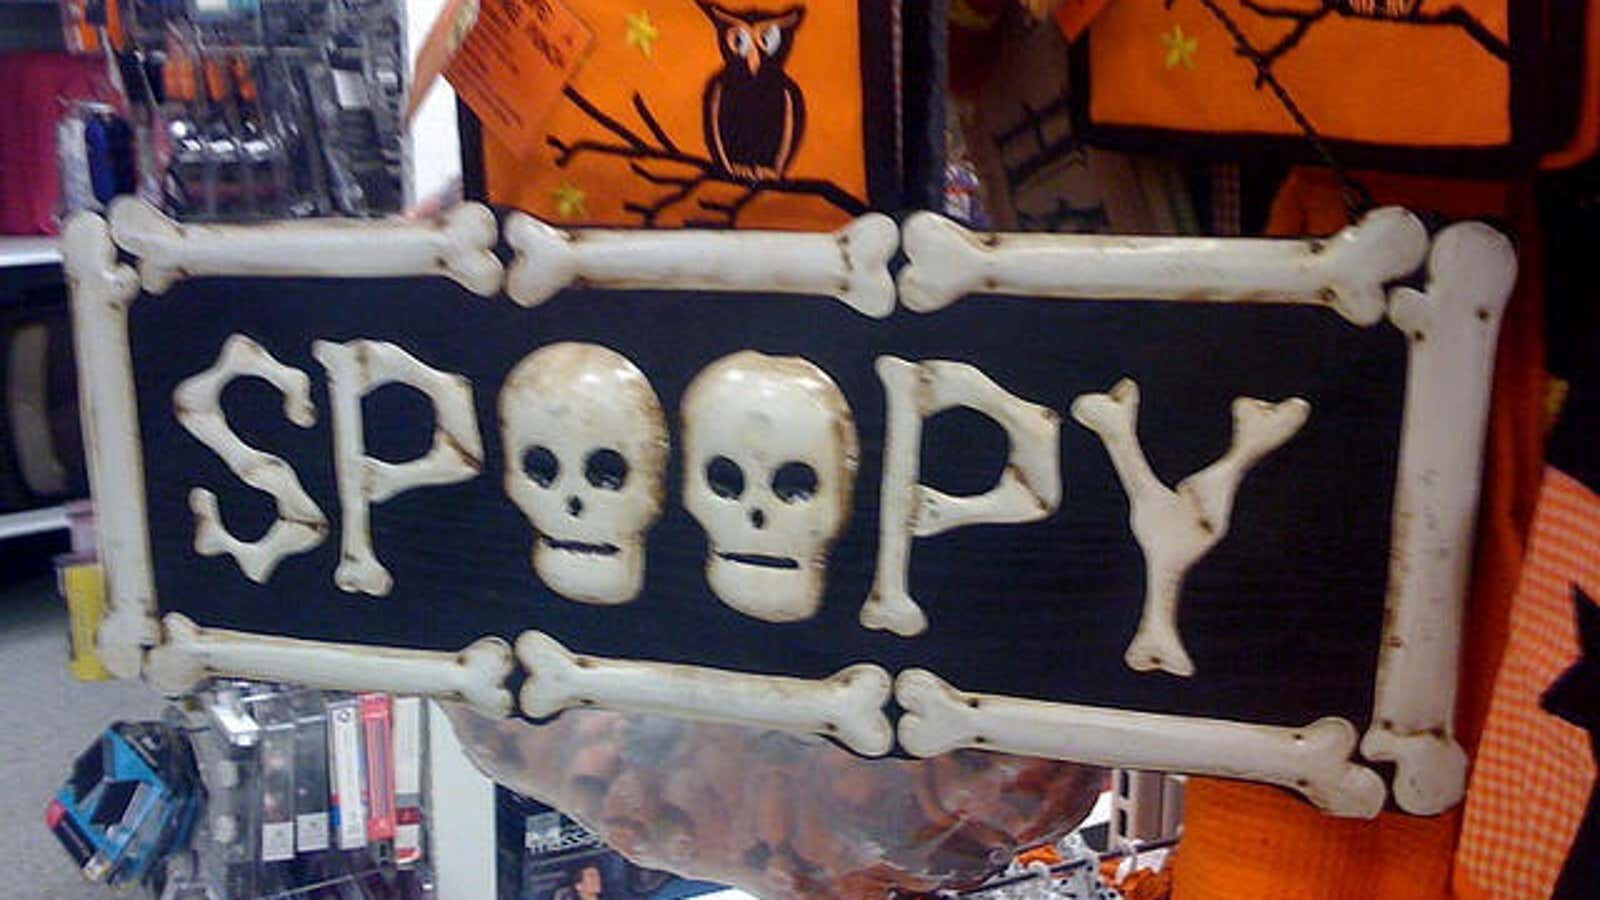 Spoopy (adj). Something that is funny and scary.